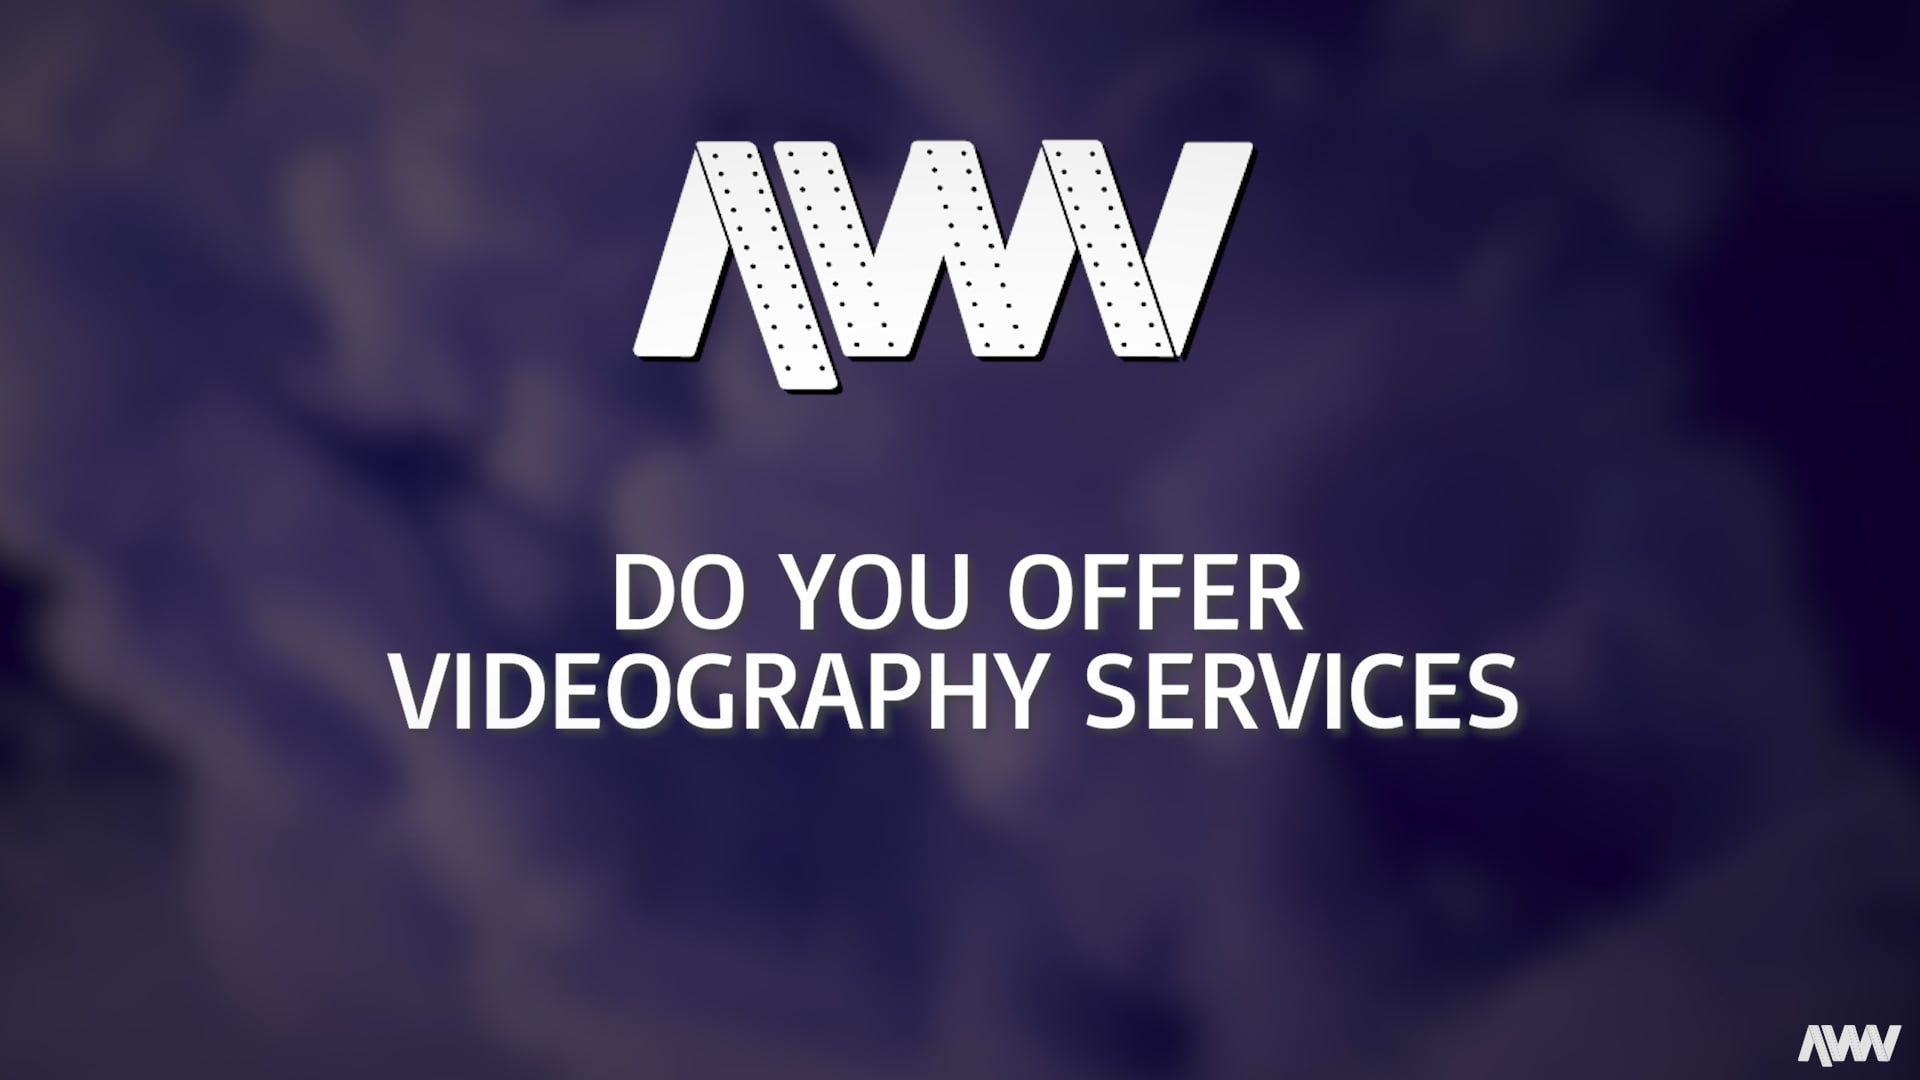 Does AWV Offer Videography Services?